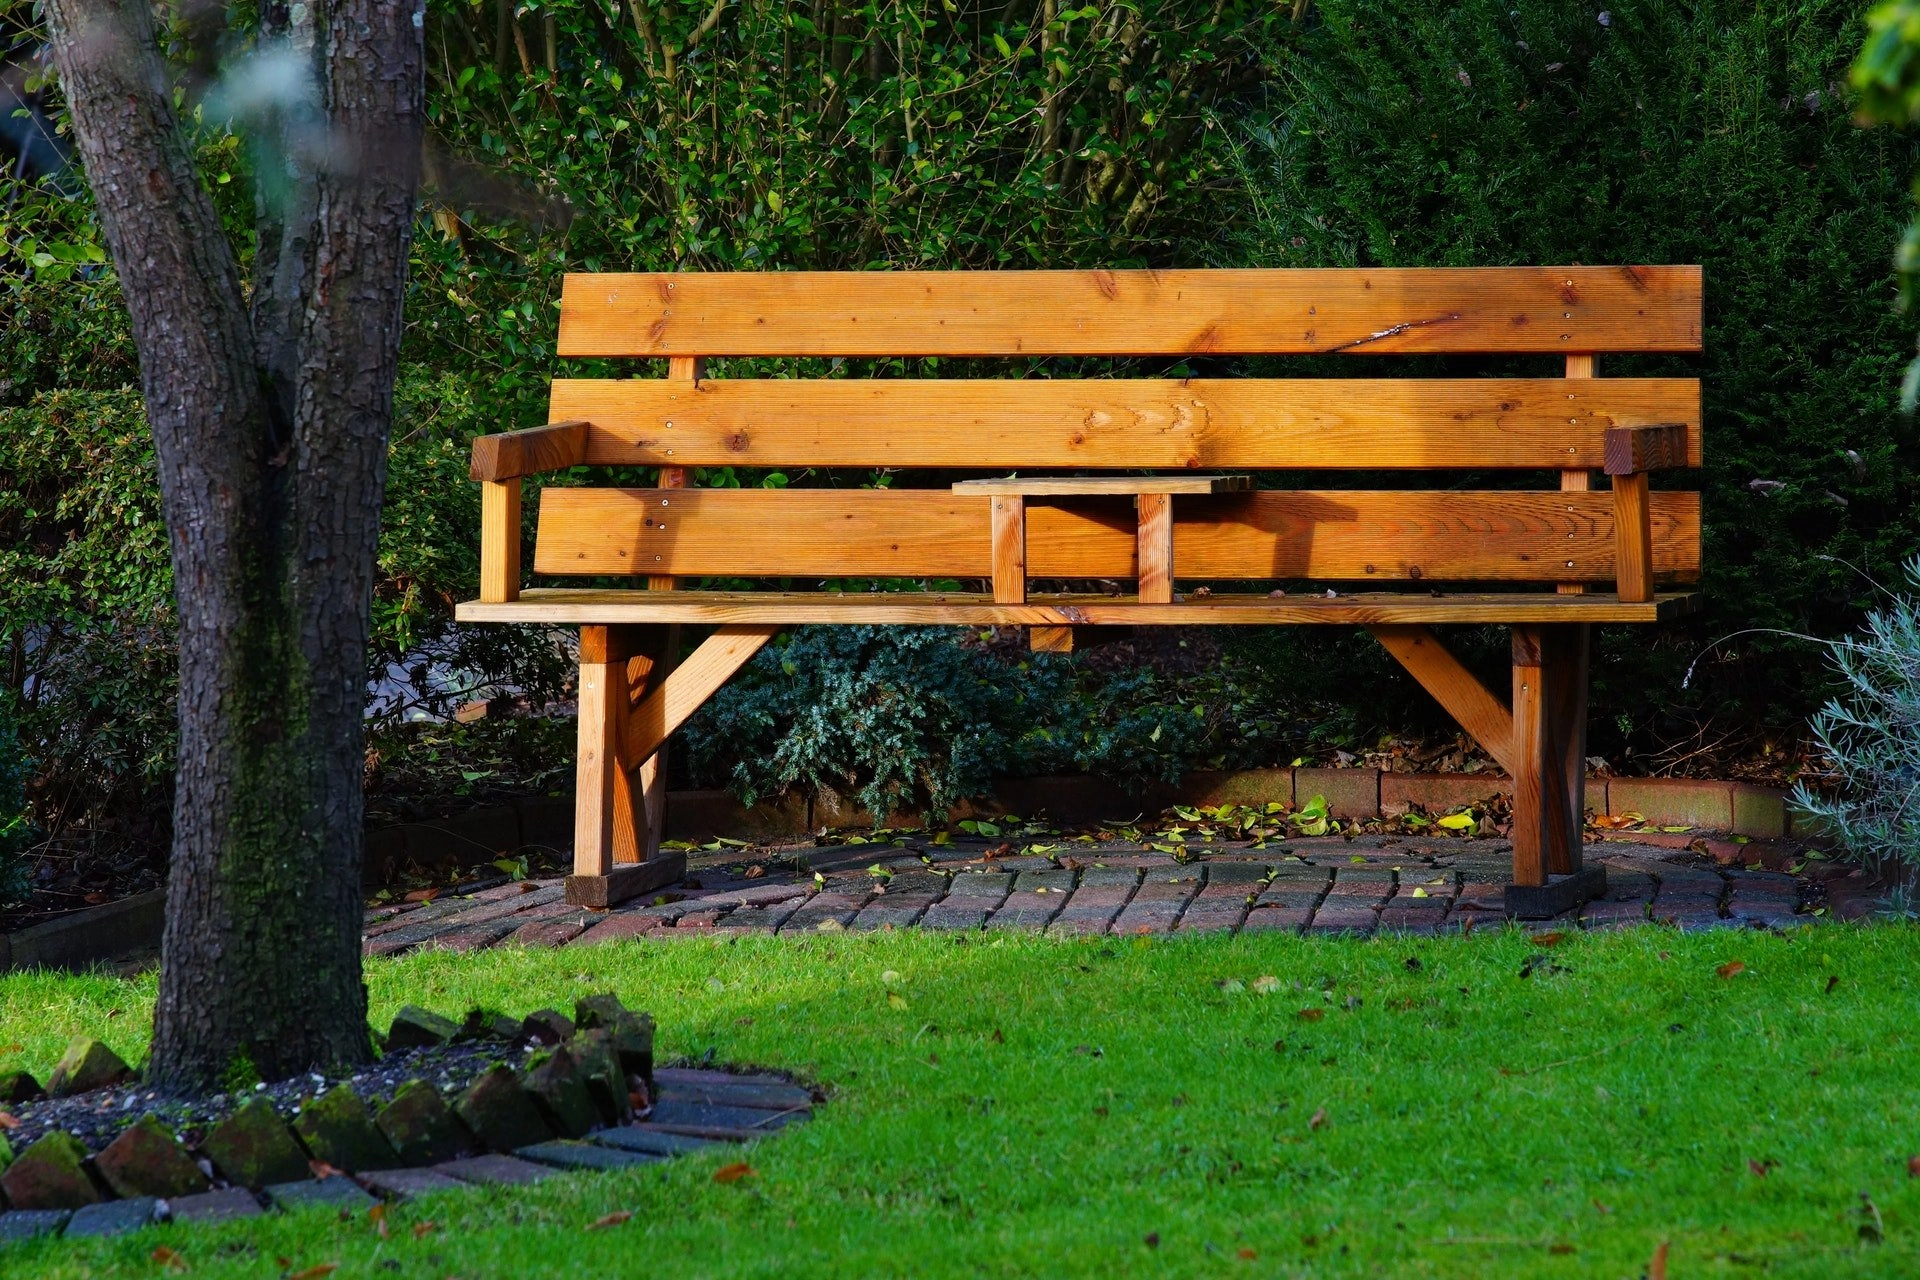 A picture of a wooden garden bench